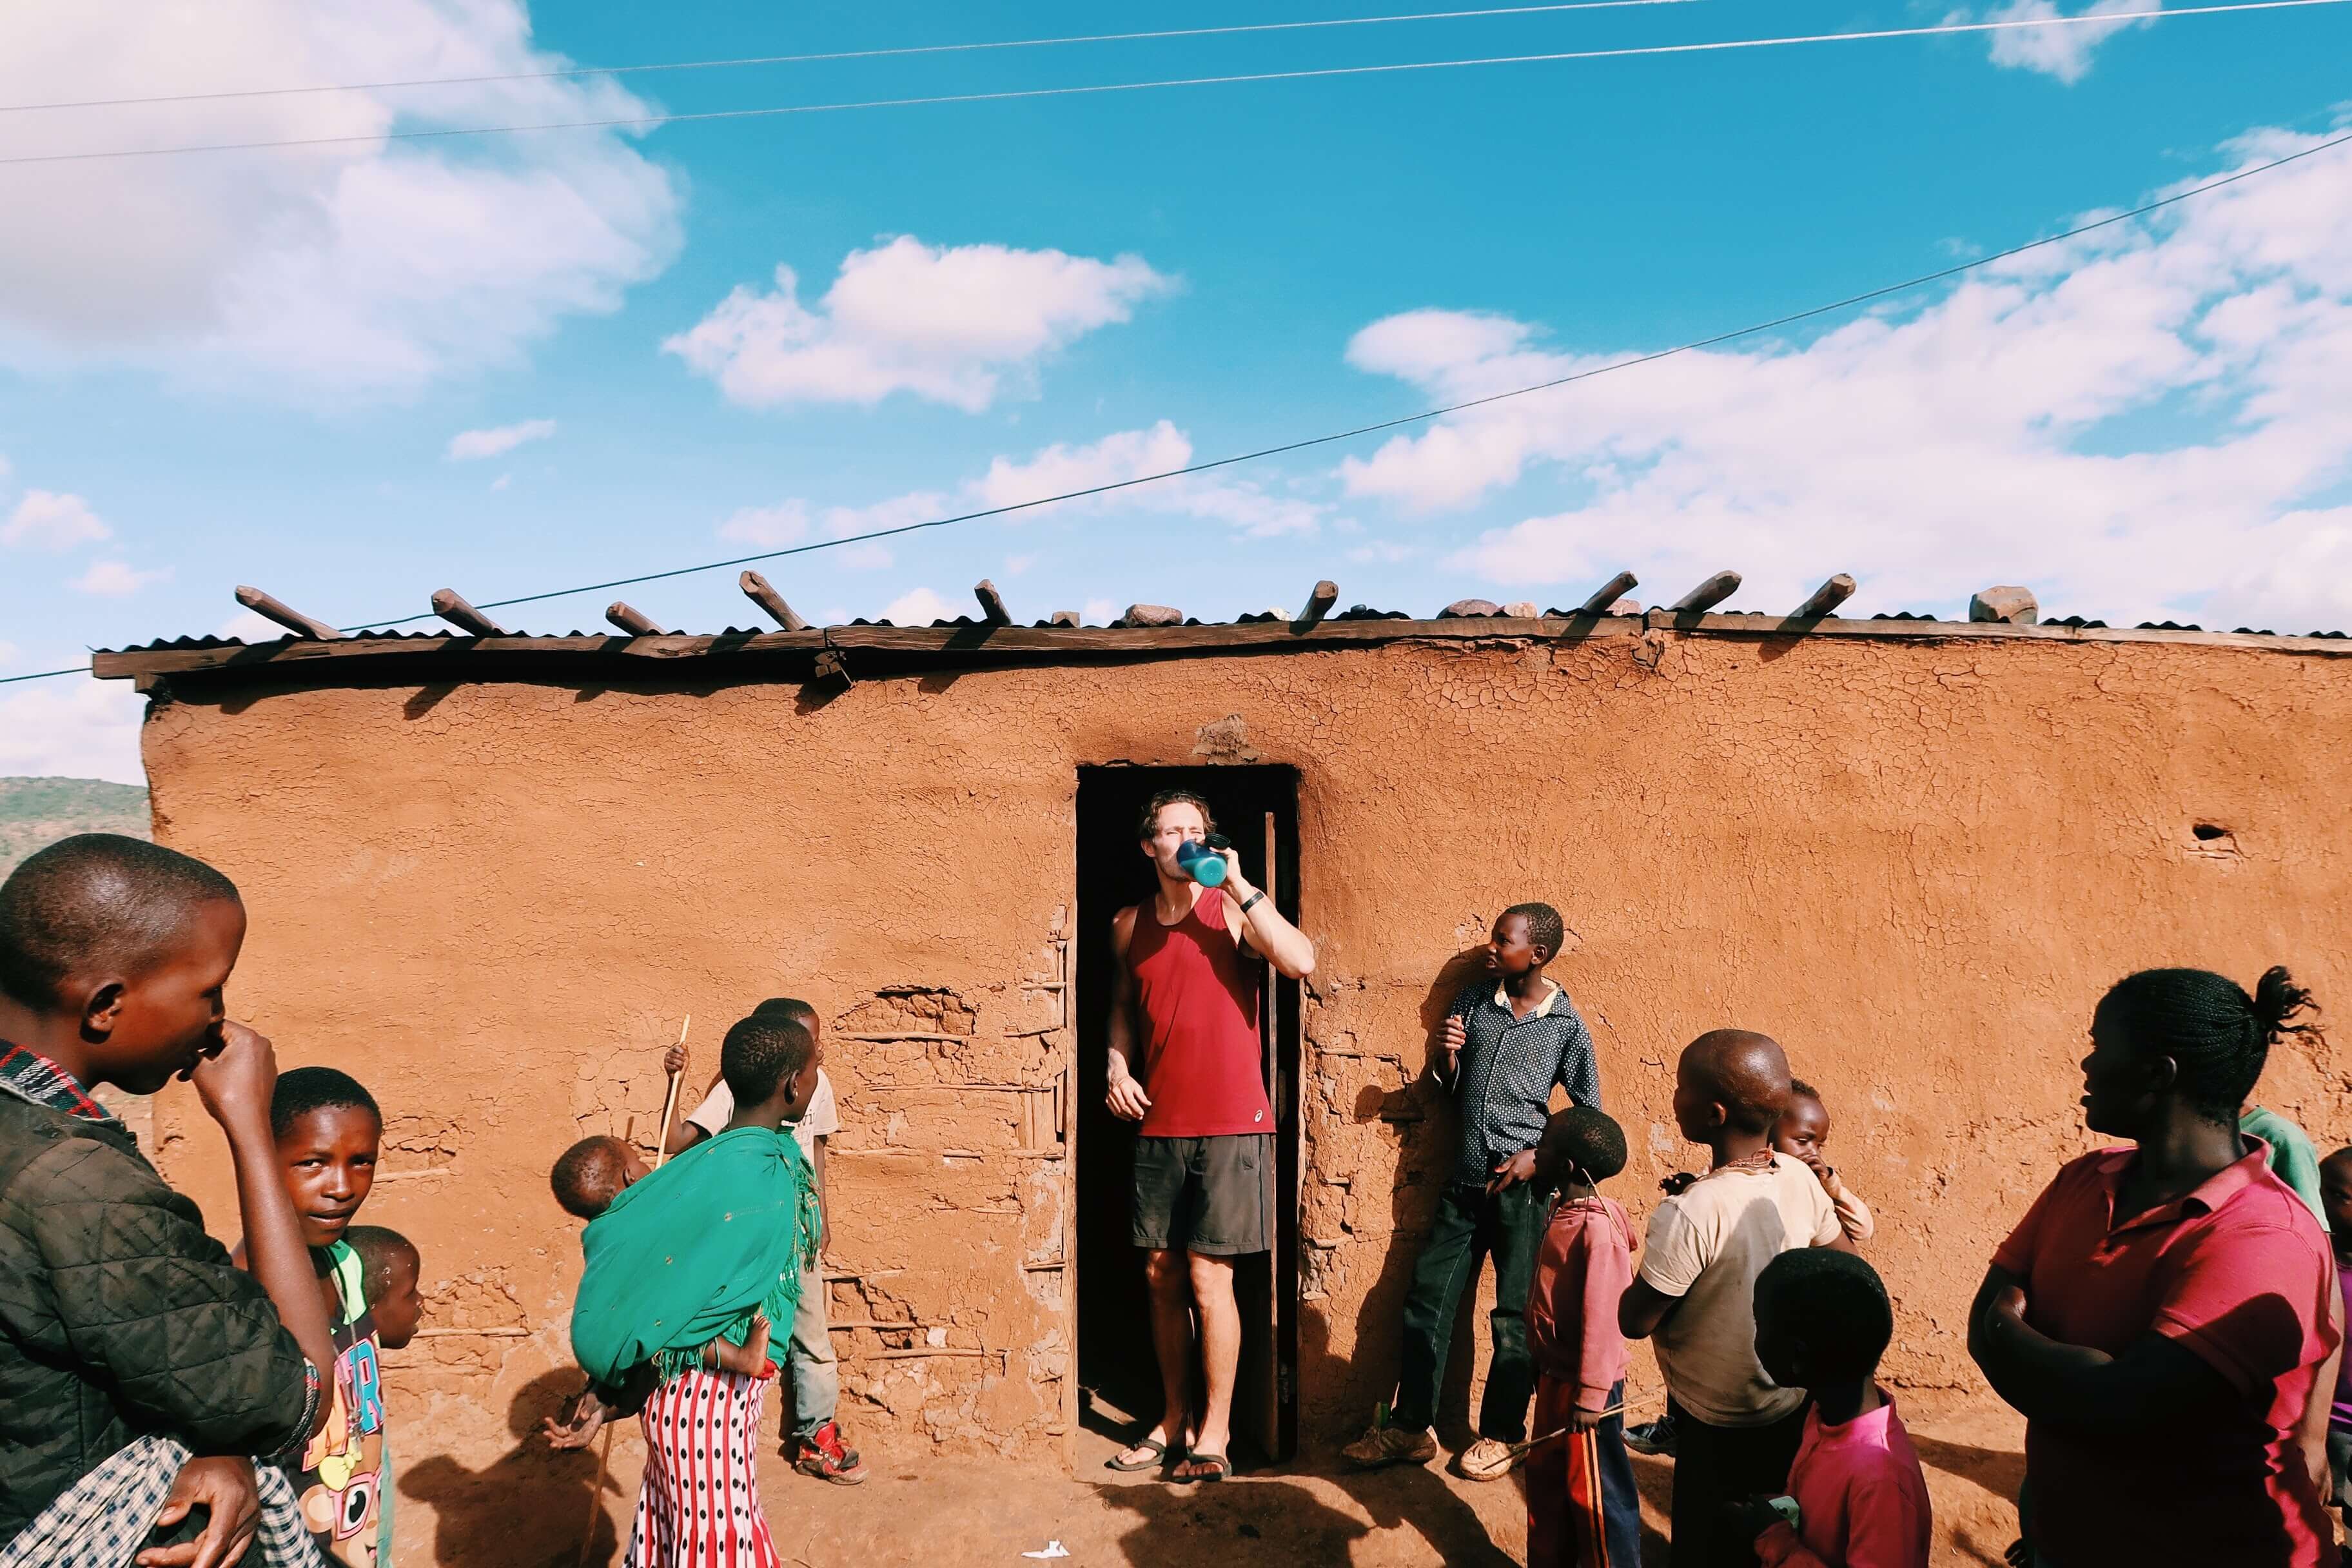 Chris emerging from a hut with Maasai wine surrounded by curious locals